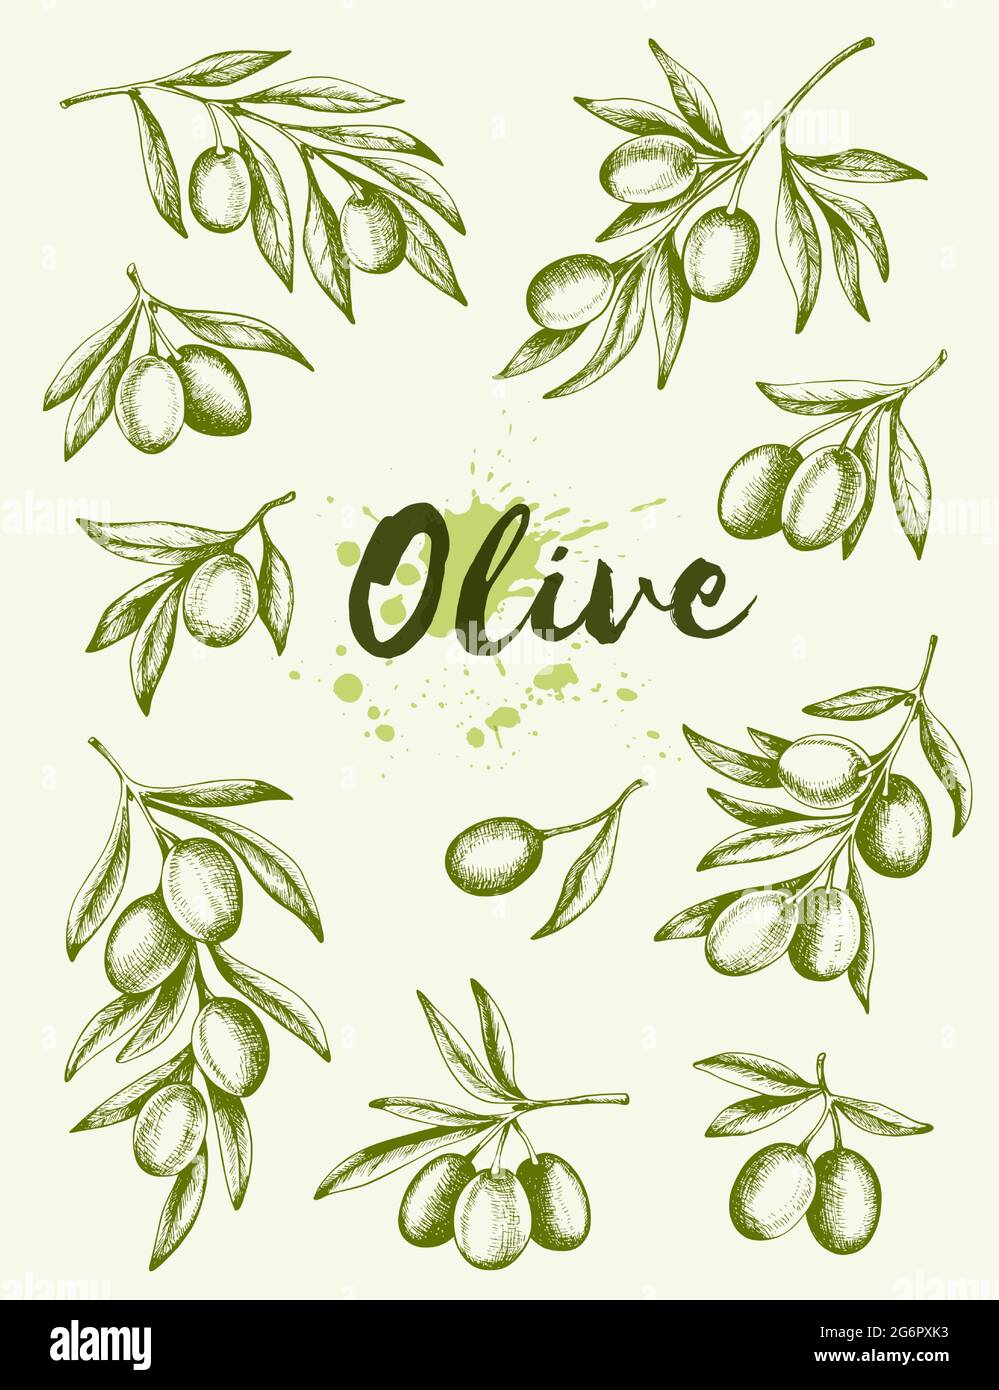 Decorative Vintage Hand Drawn Olives Vector Illustration Stock Vector Image And Art Alamy 